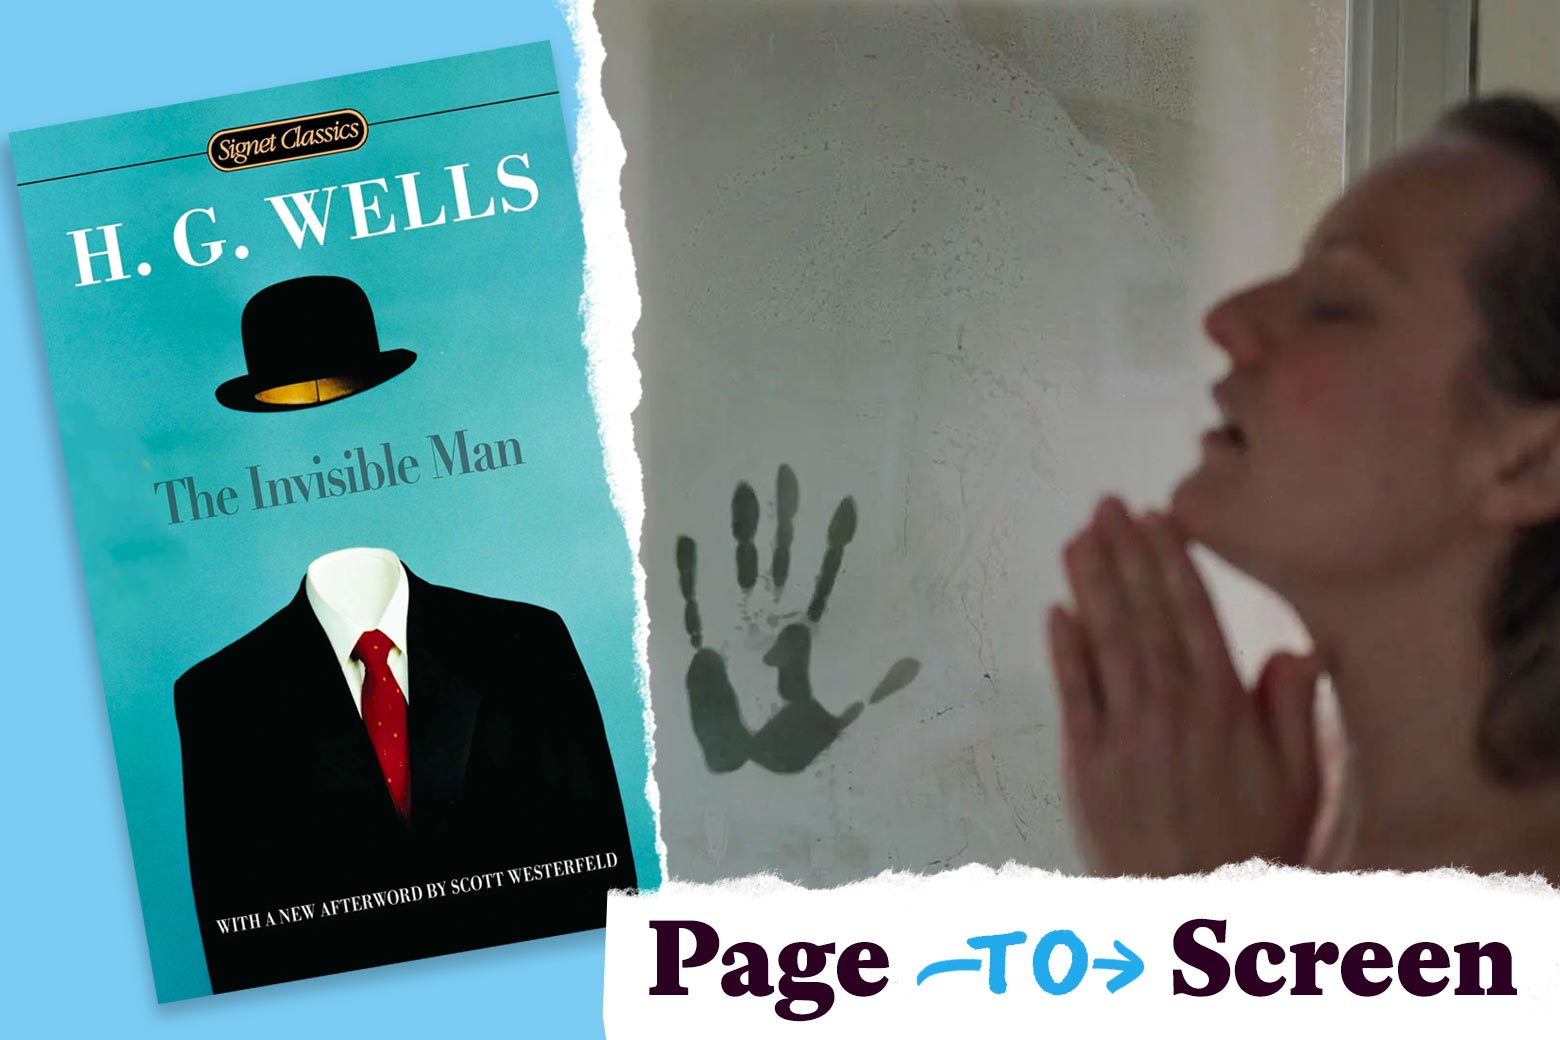 Left: a copy of H.G. Wells' The Invisible Man. Right: Elisabeth Moss in a shower with a handprint visible in the fogged glass. In the corner, a logo reads "Page to Screen."